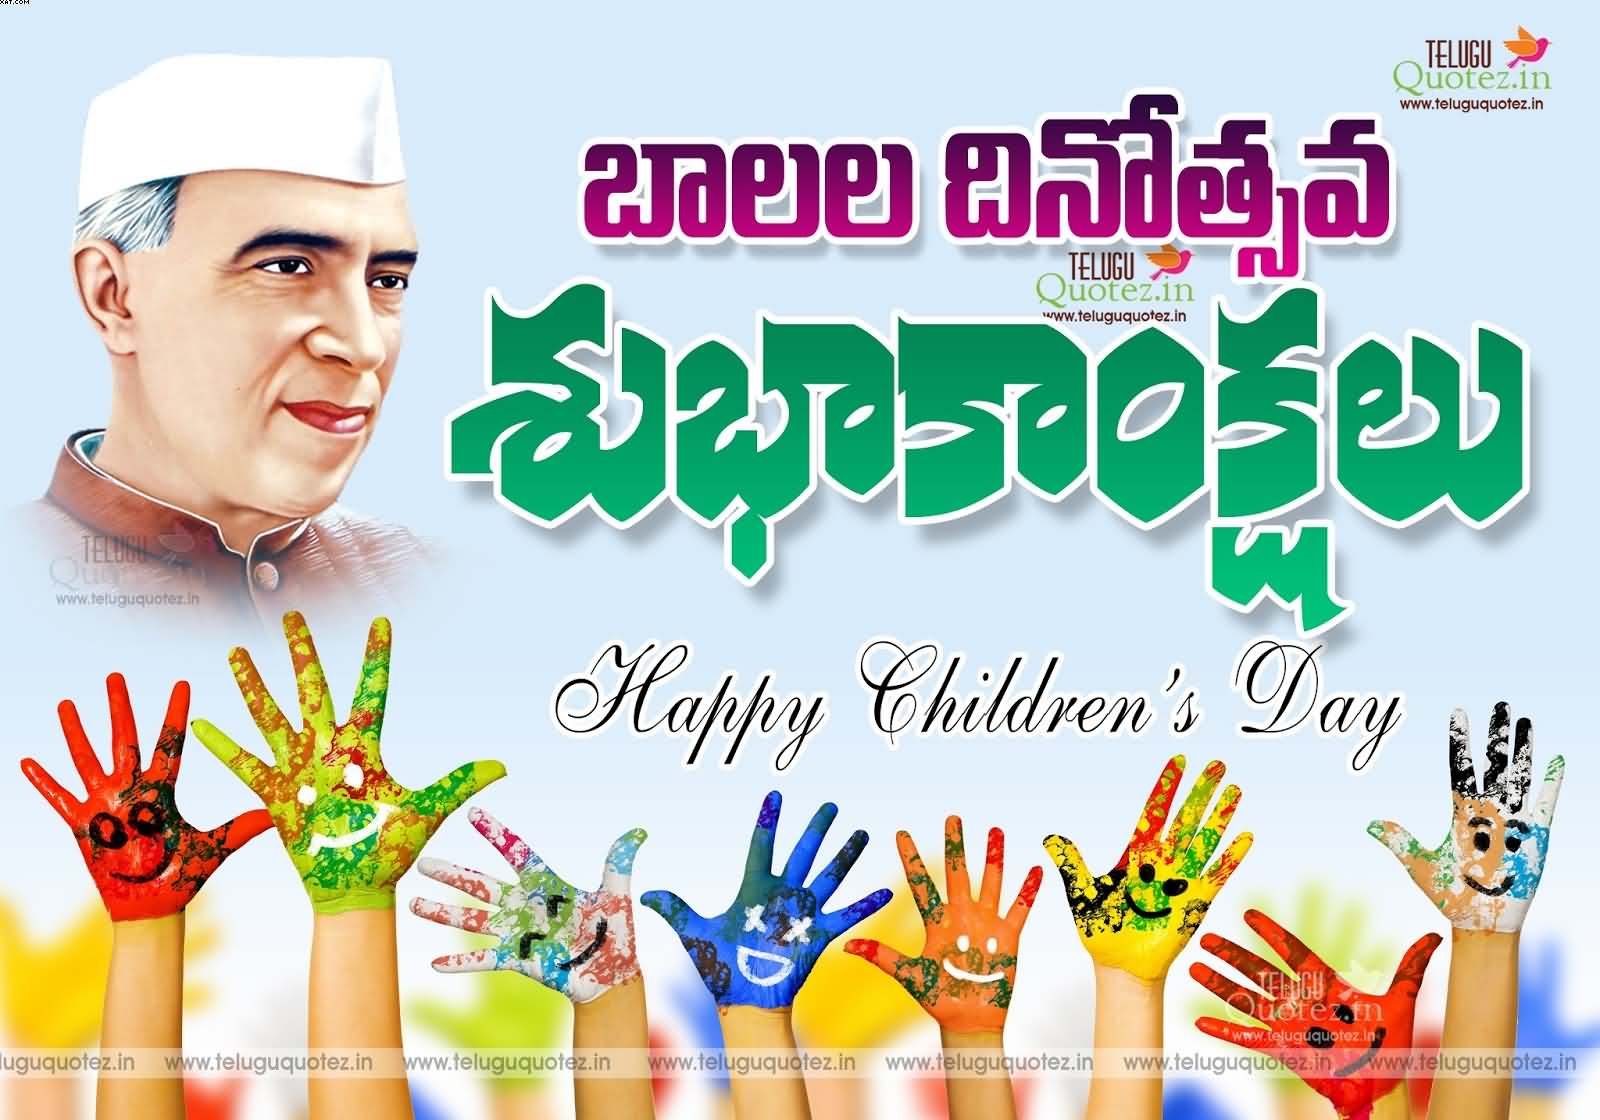 Happy Children's Day Telugu Wishes Wallpaper - Family Enrichment Network , HD Wallpaper & Backgrounds